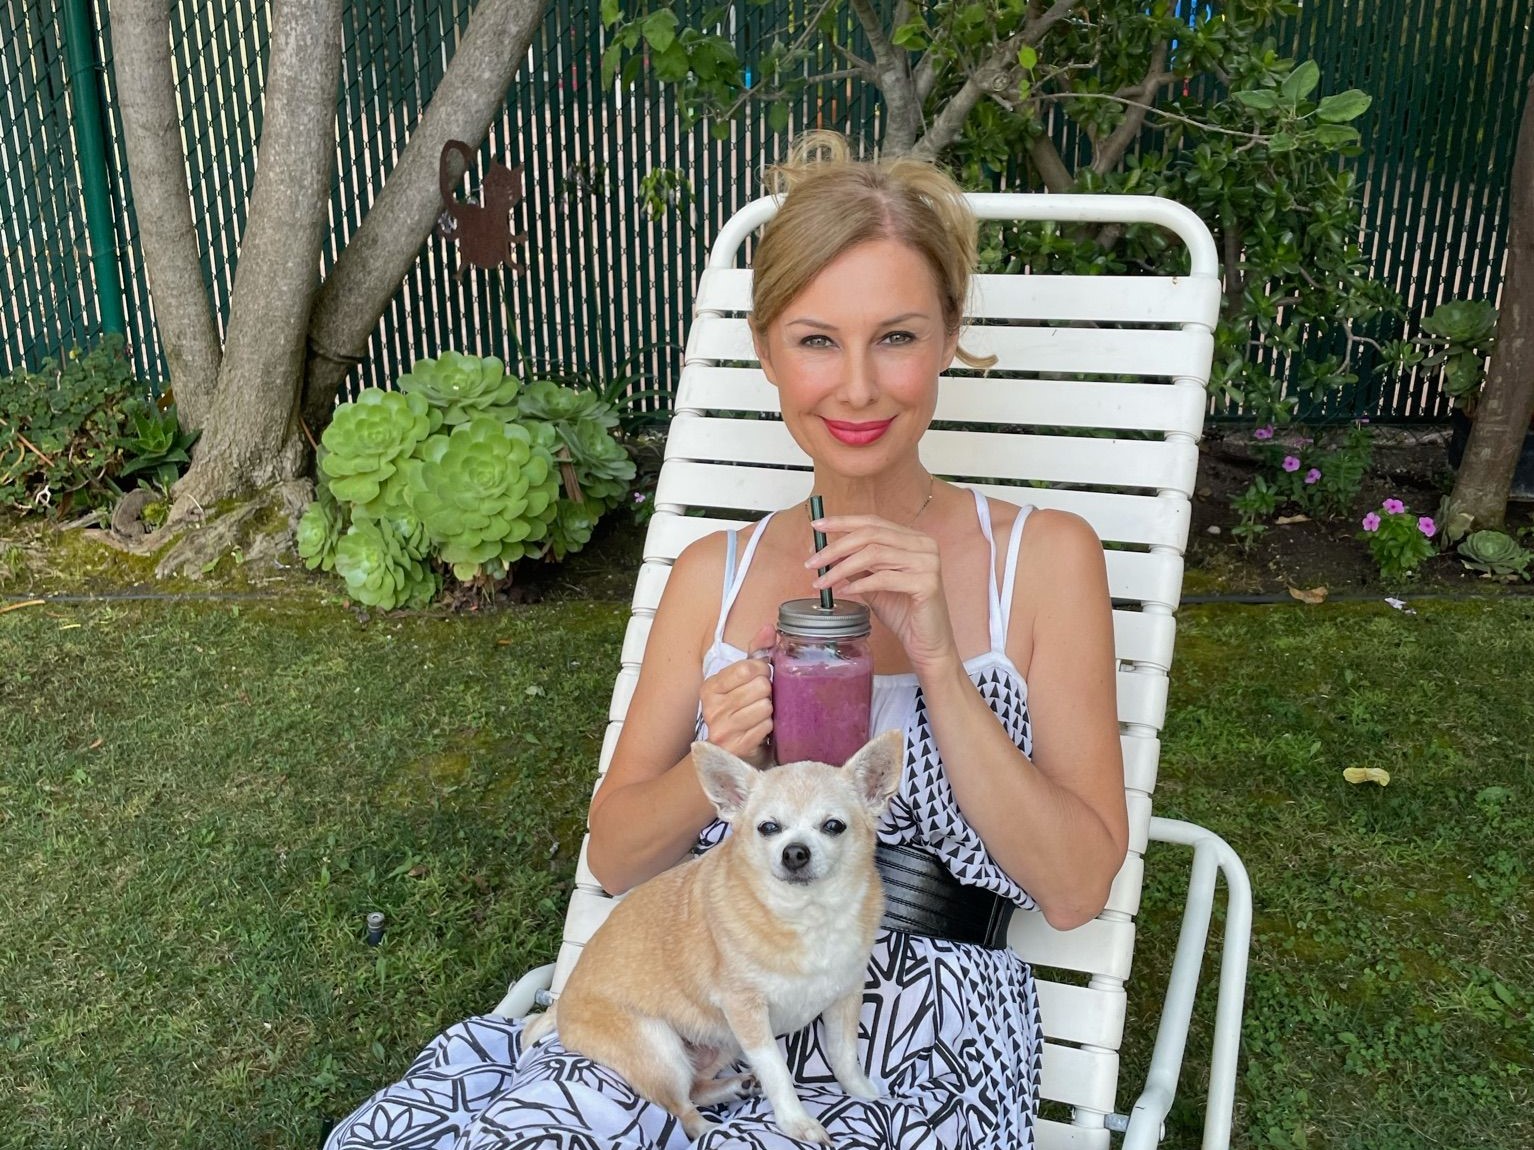 Simply Straws – The reusable glass drinking straw, interview with Chanelle Sladics